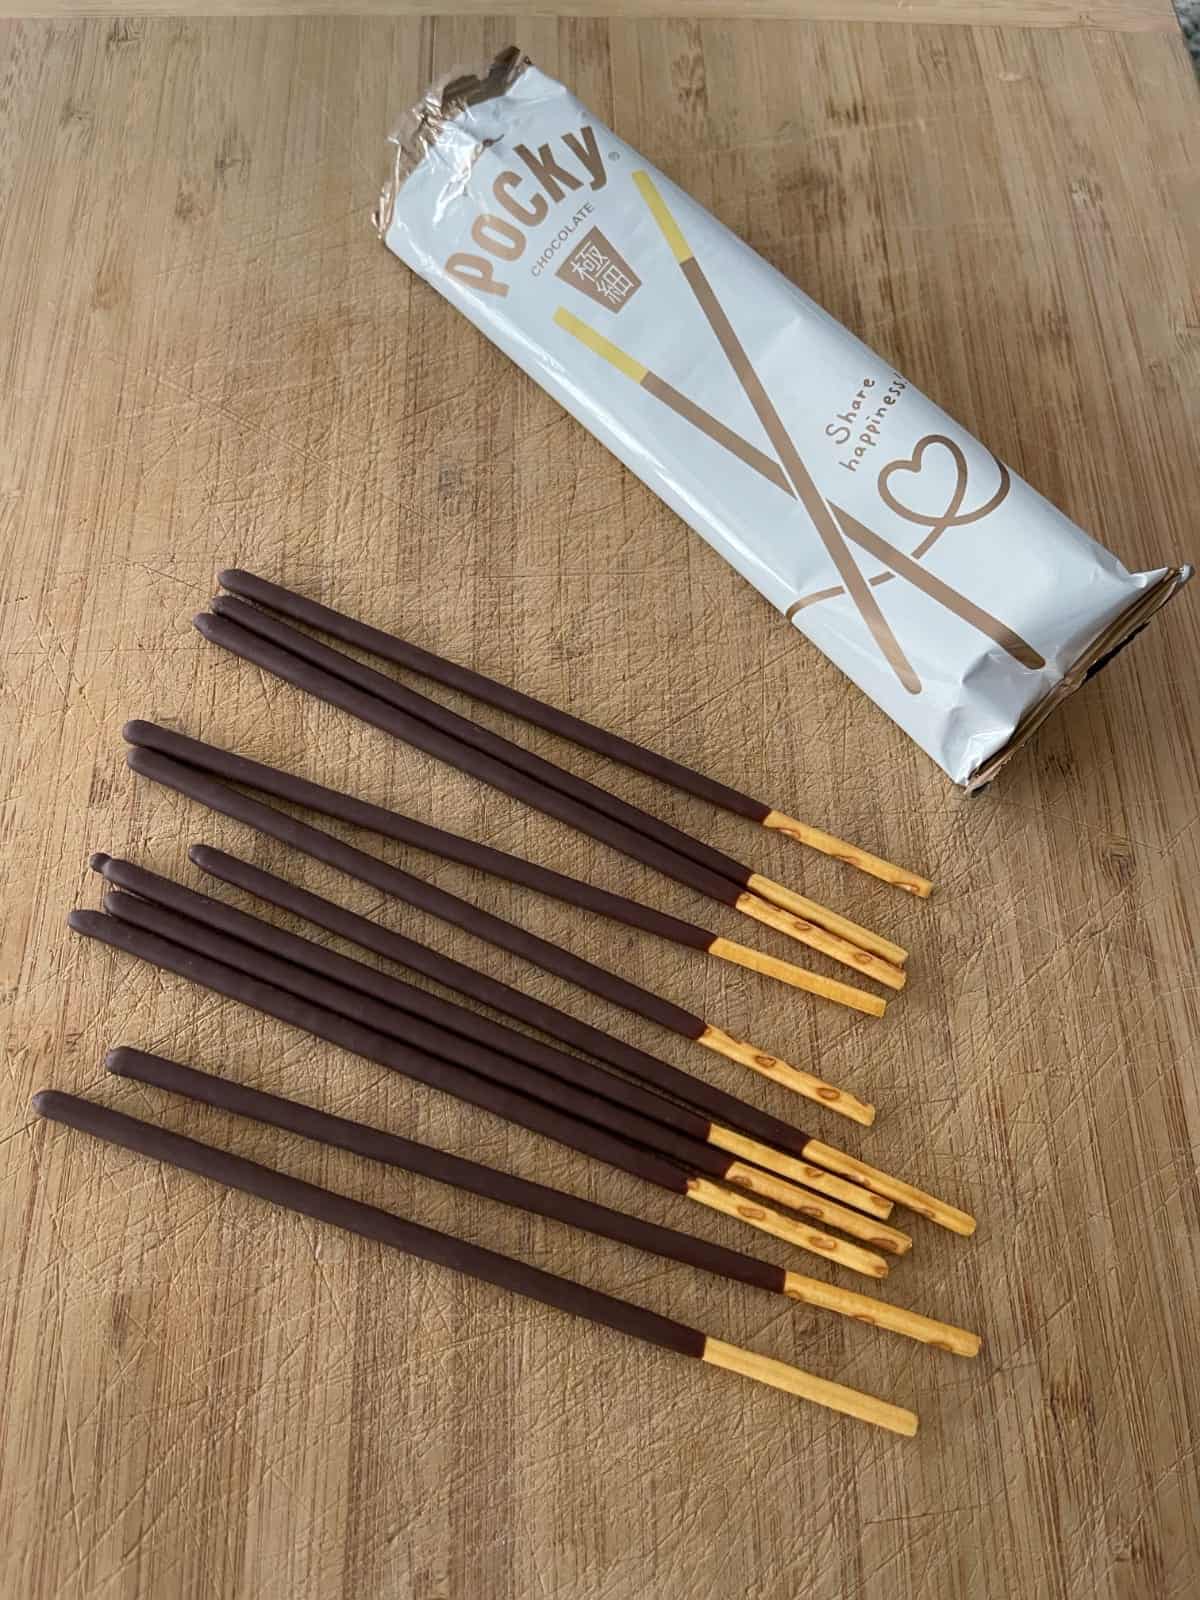 Package of chocolate Pocky sticks on wood cutting board.